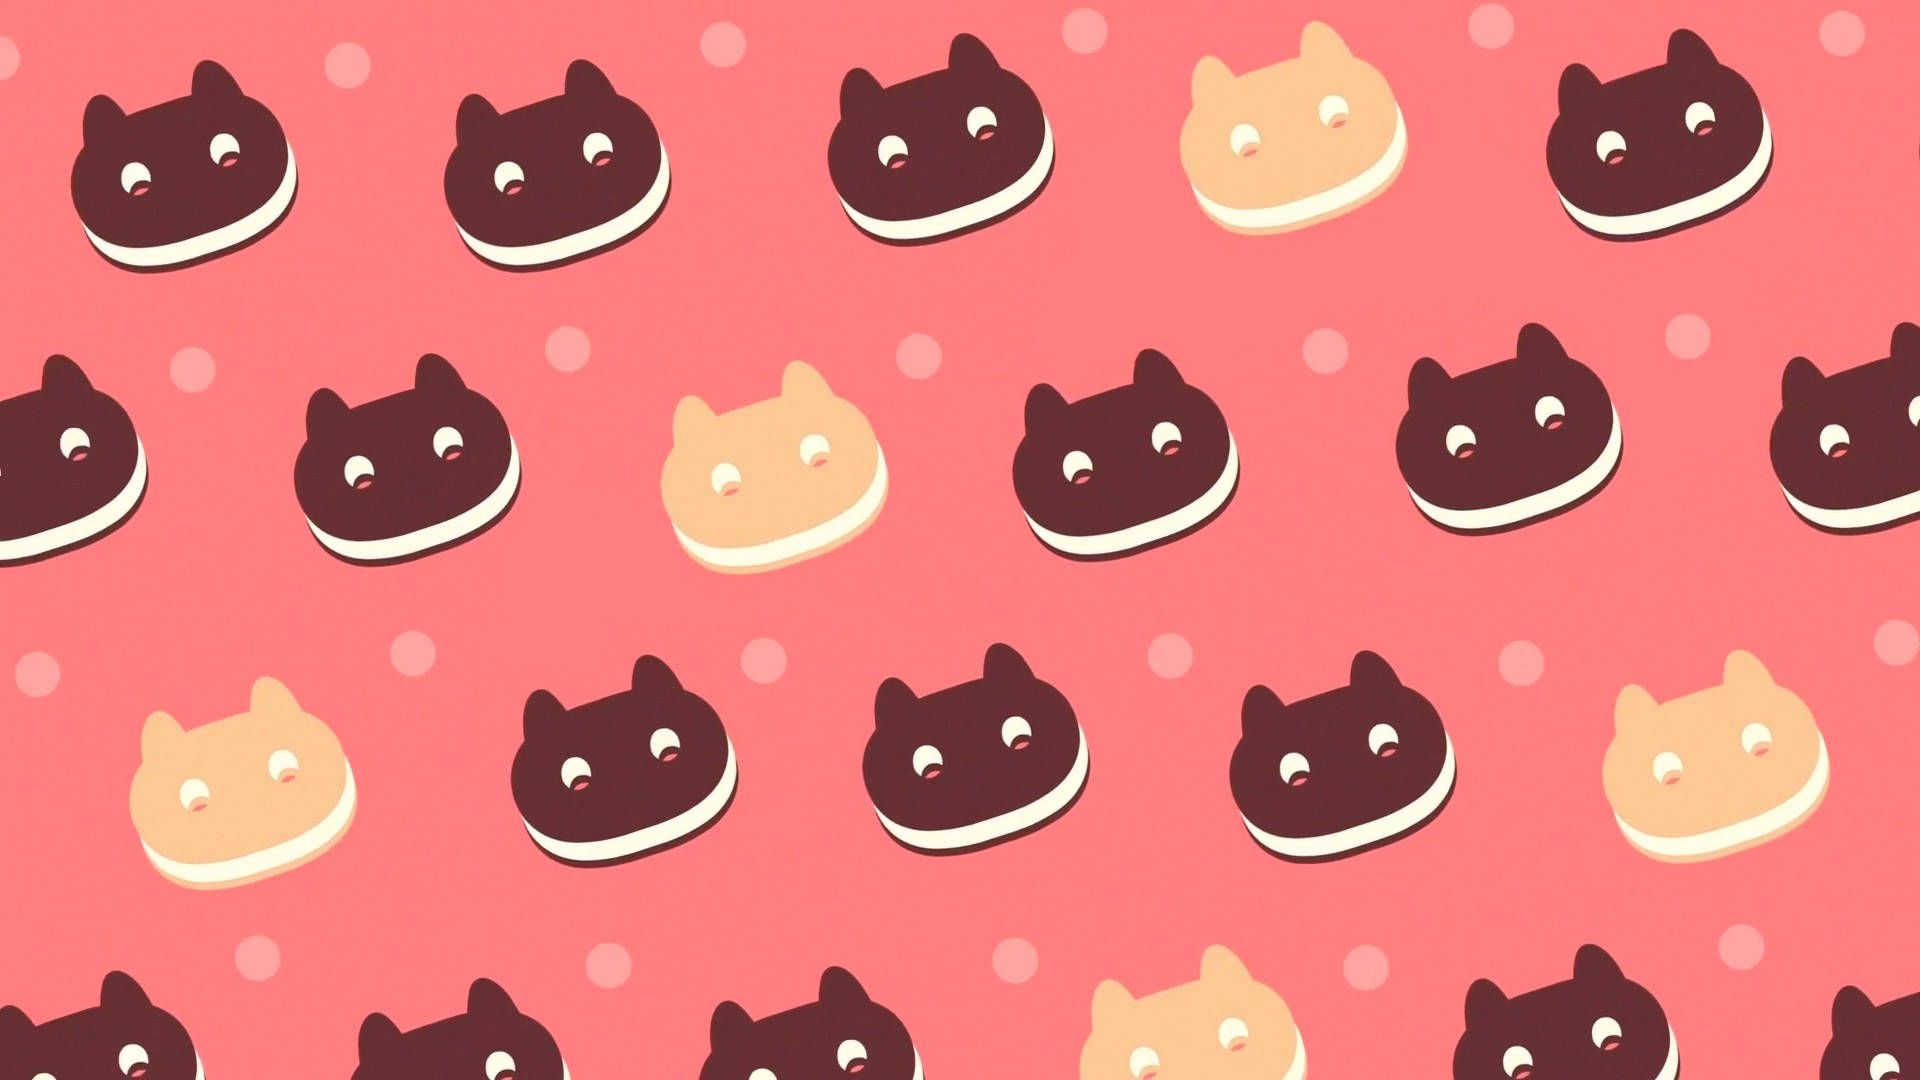 A pattern of cat-shaped cookies on a pink background - Cute